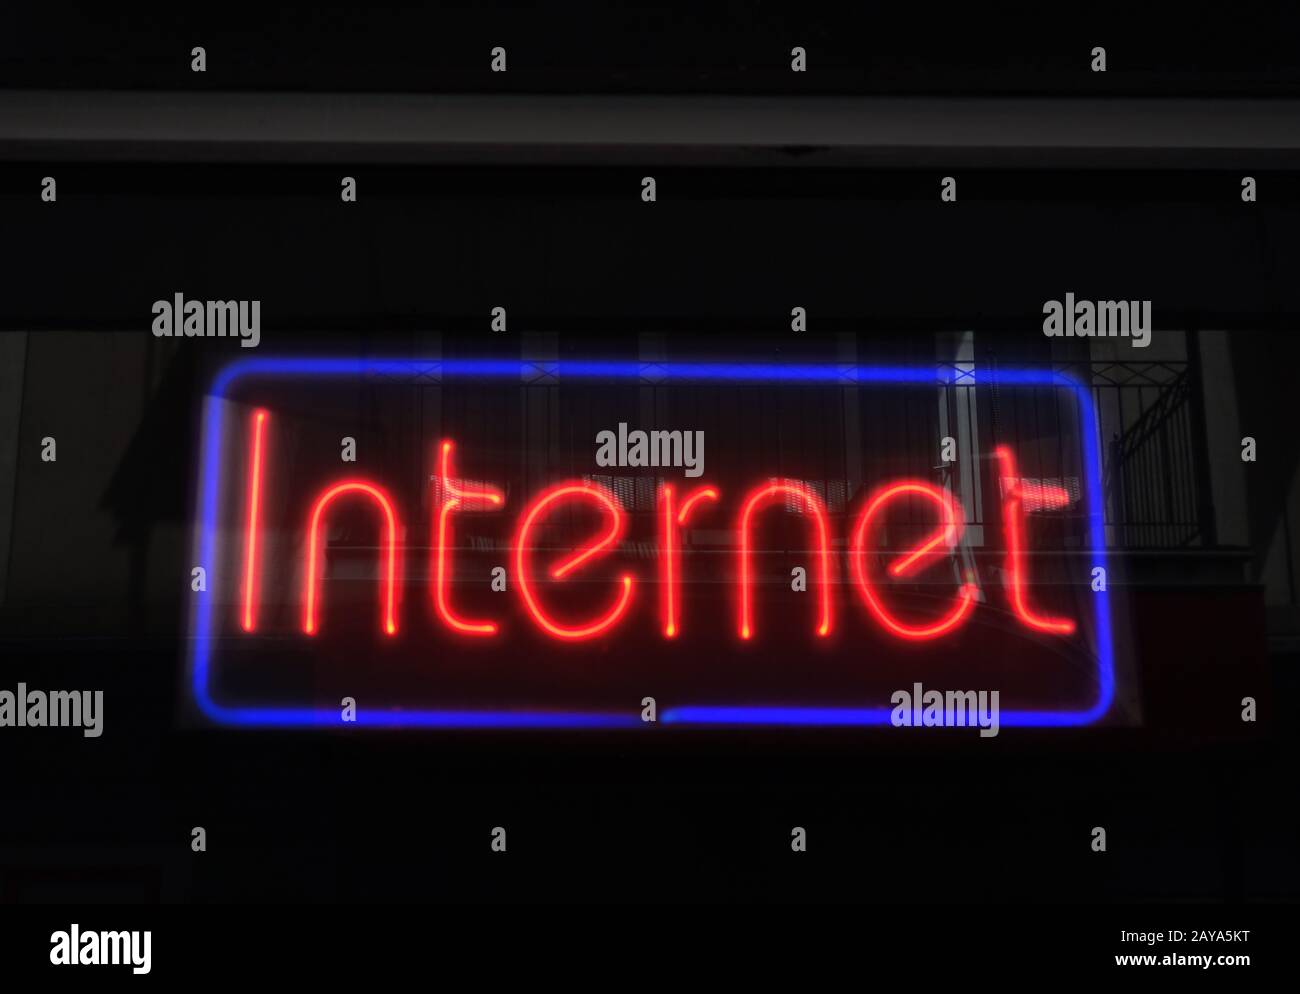 Internet cafe neon sign Stock Photo